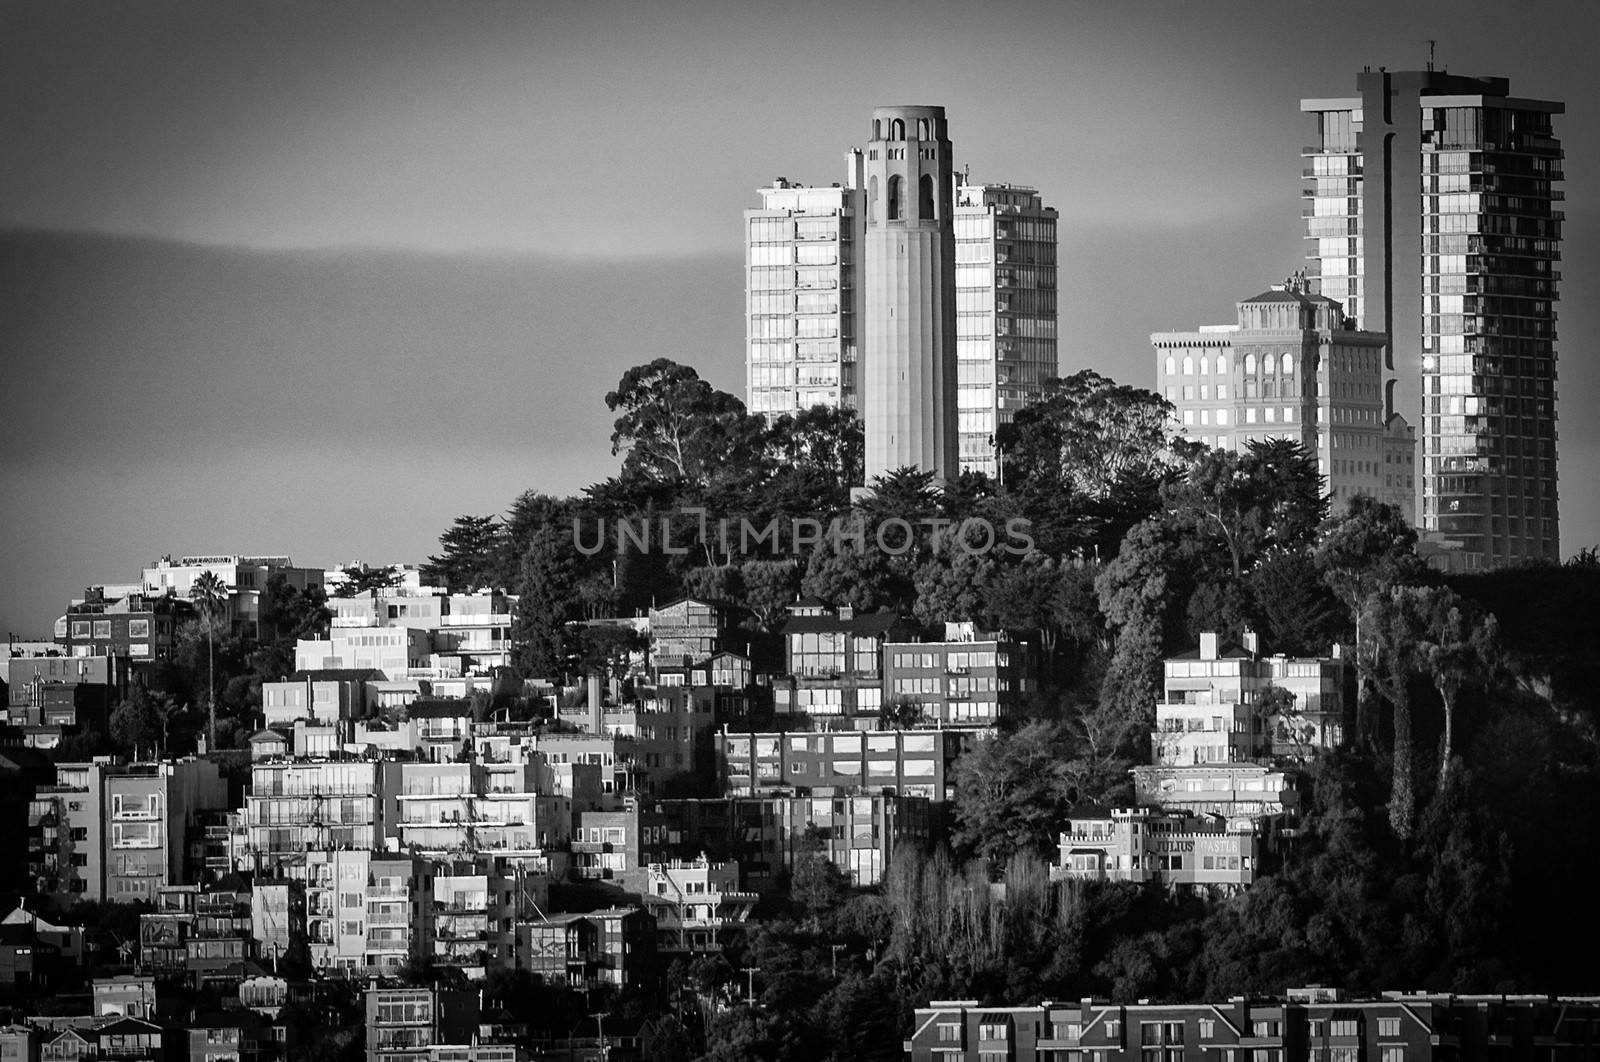 Coit Tower on Telegraph Hill by CelsoDiniz